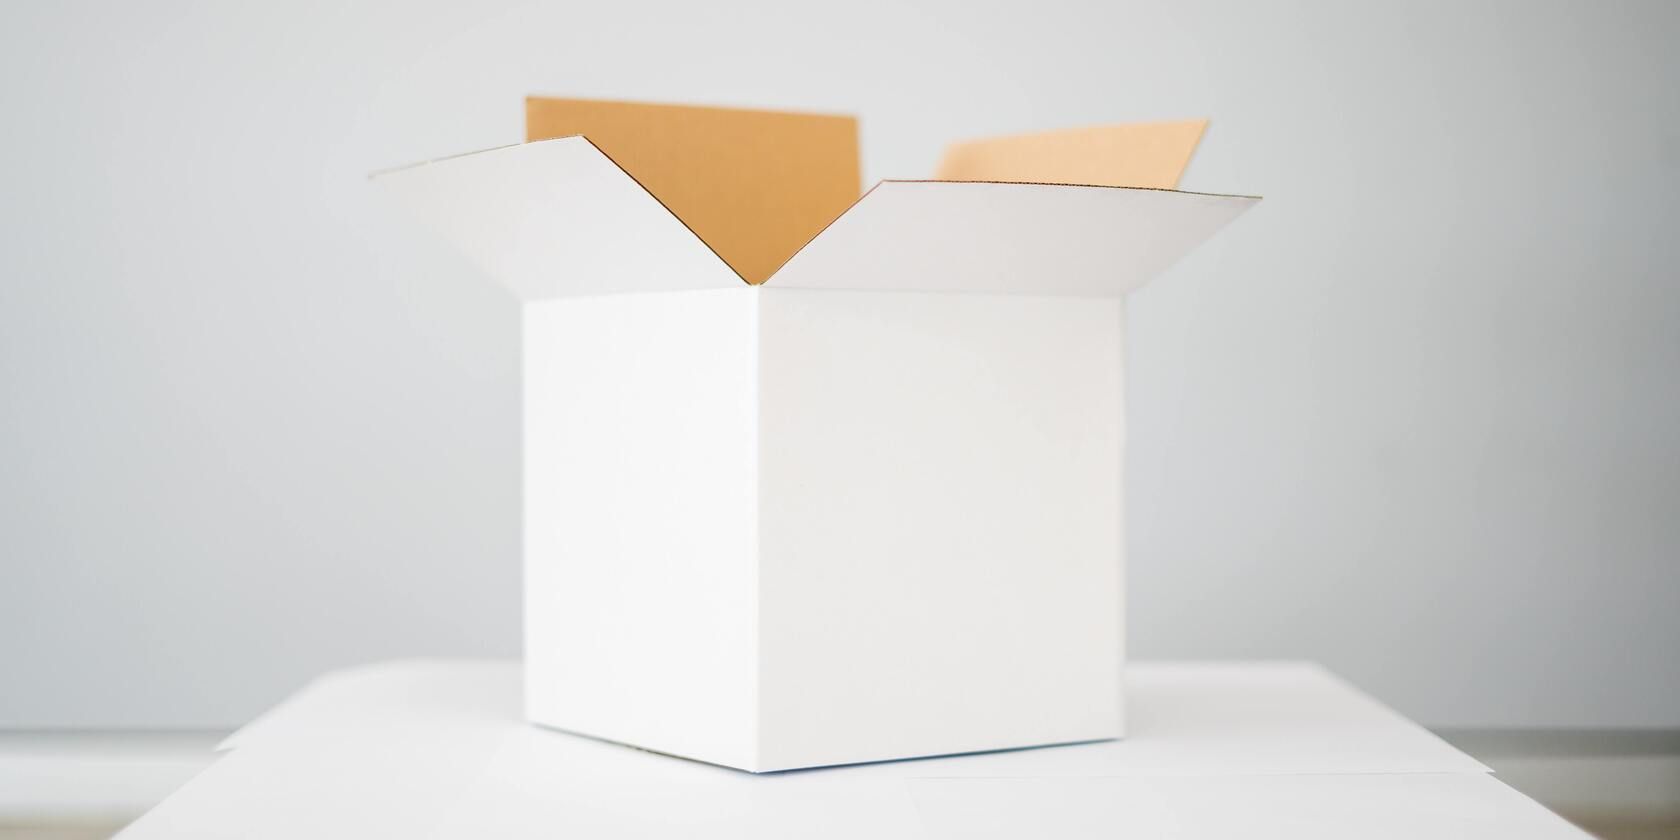 An image of an open white box